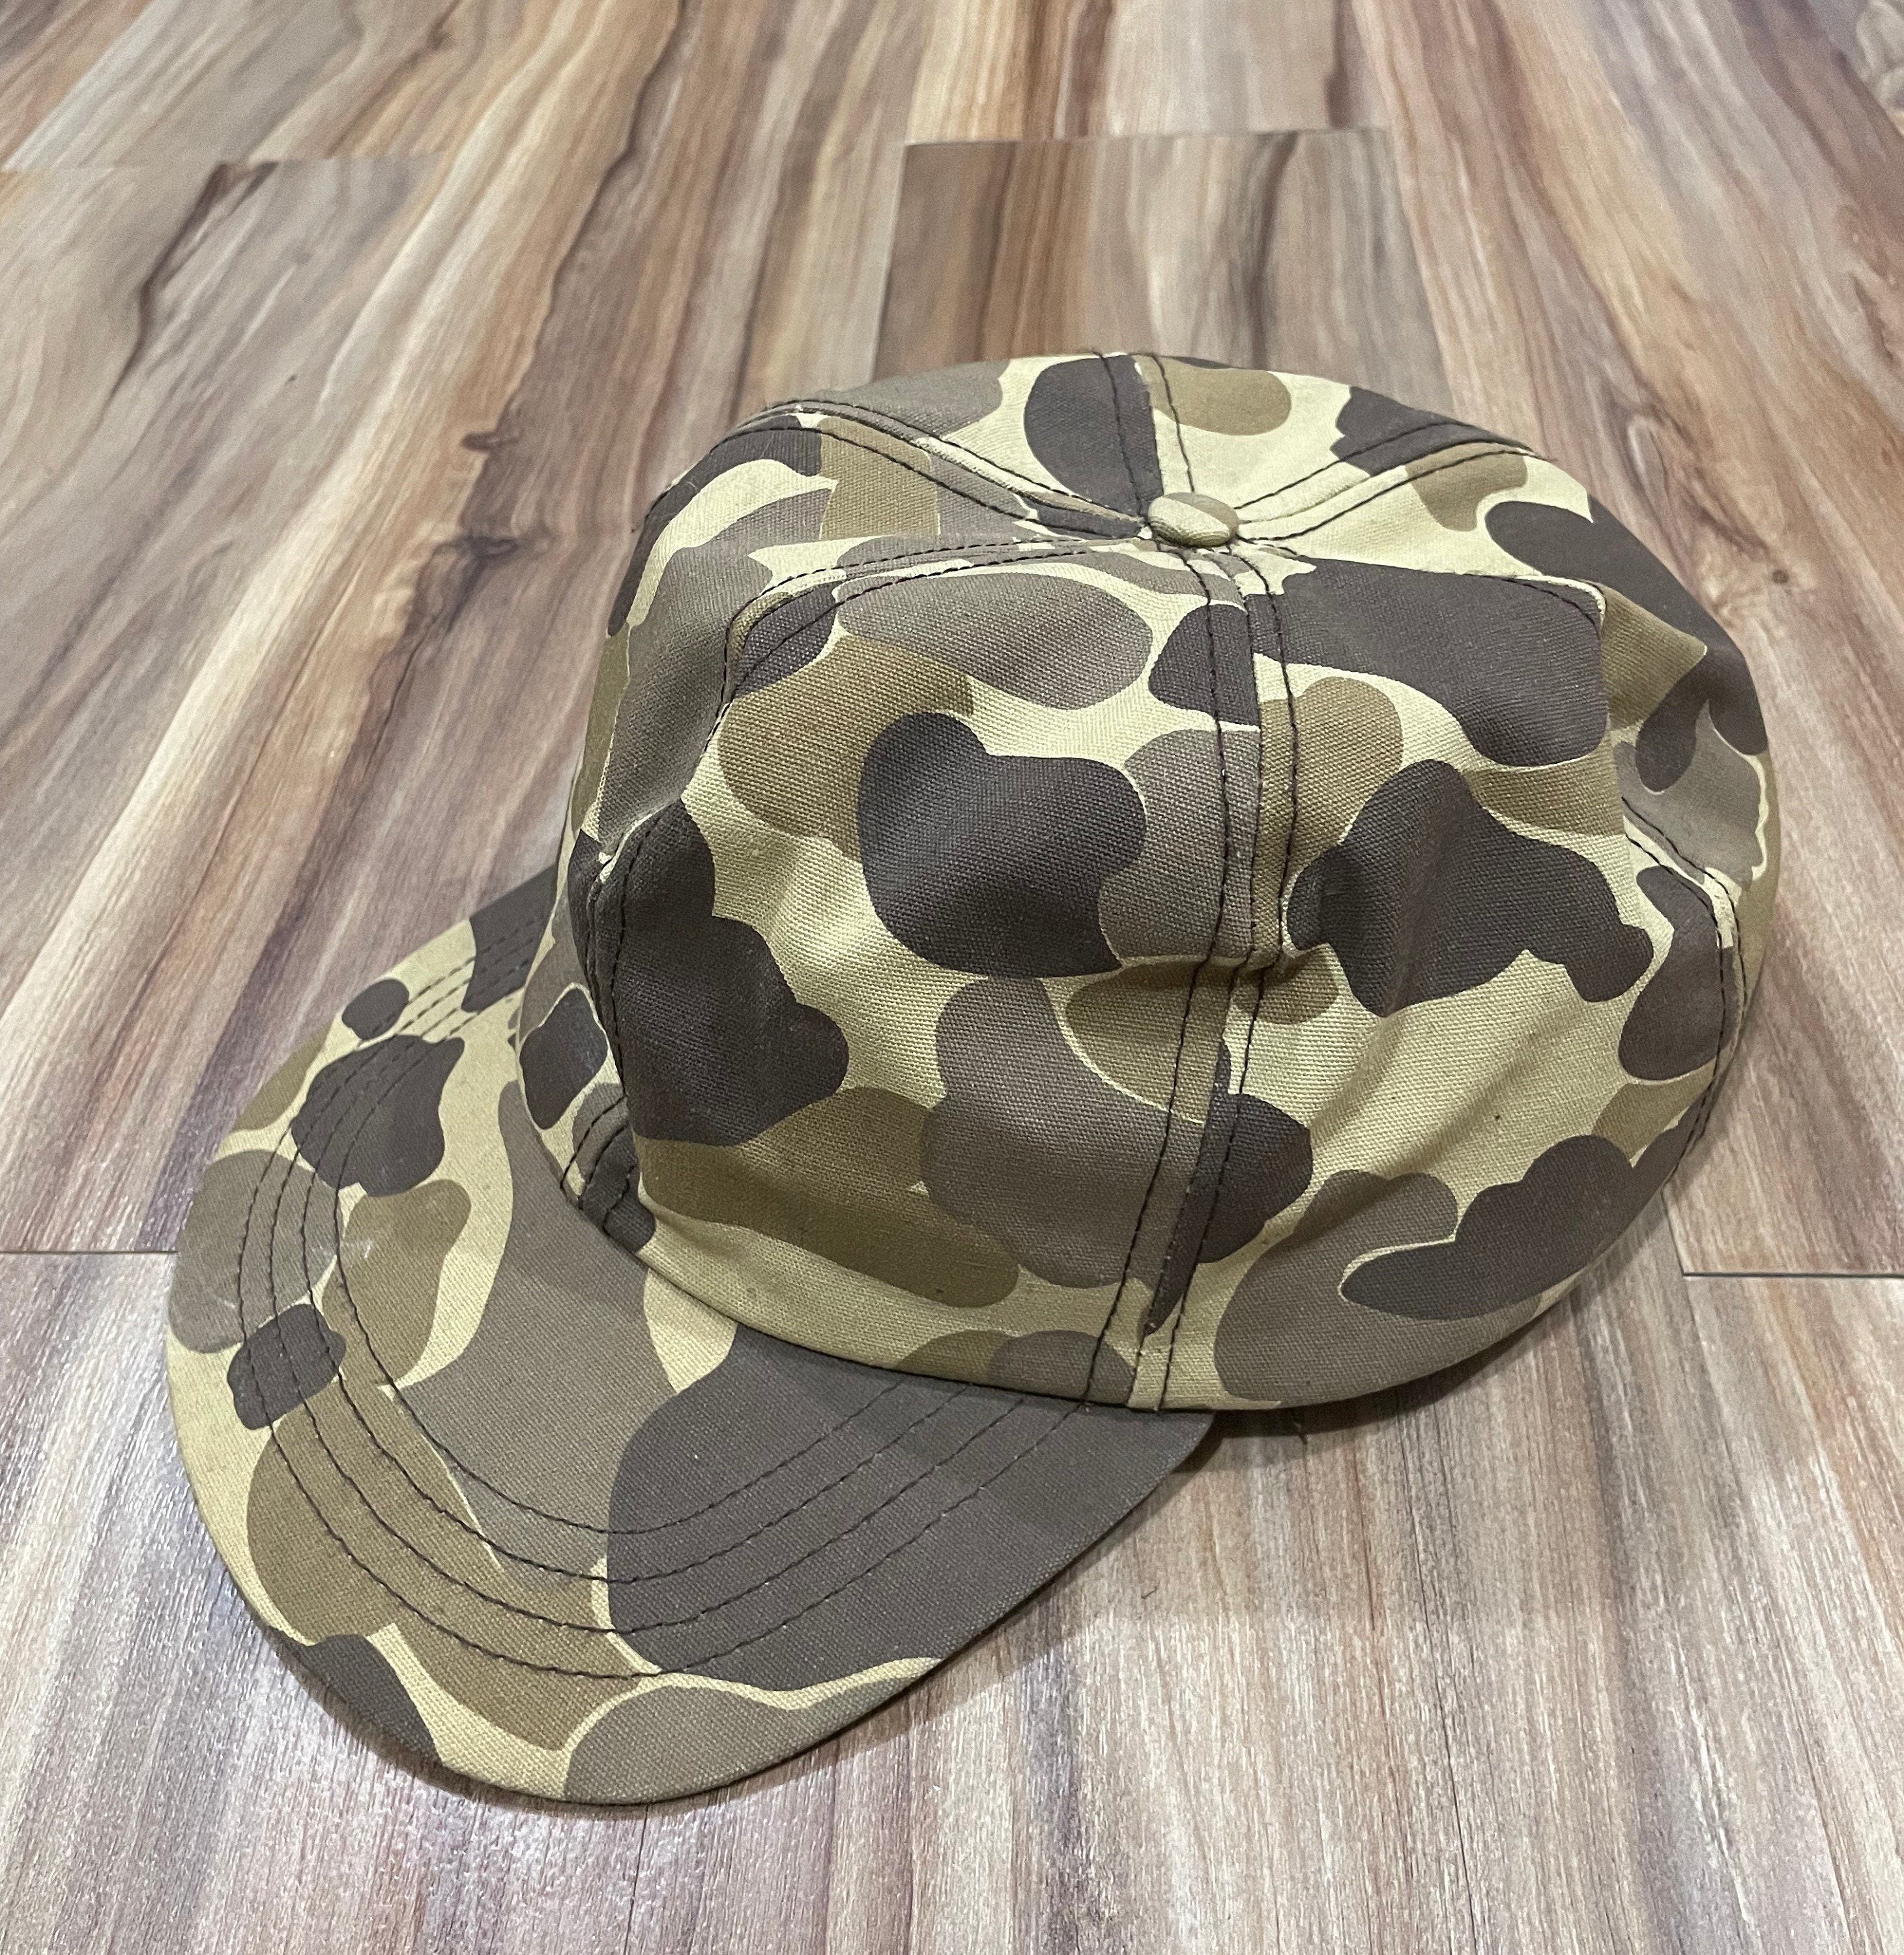 Medium Vintage 90s Gore-tex Duck Camo Insulated Trapper Hat Cap Ear Flaps  USA Made Brown Camouflage -  New Zealand